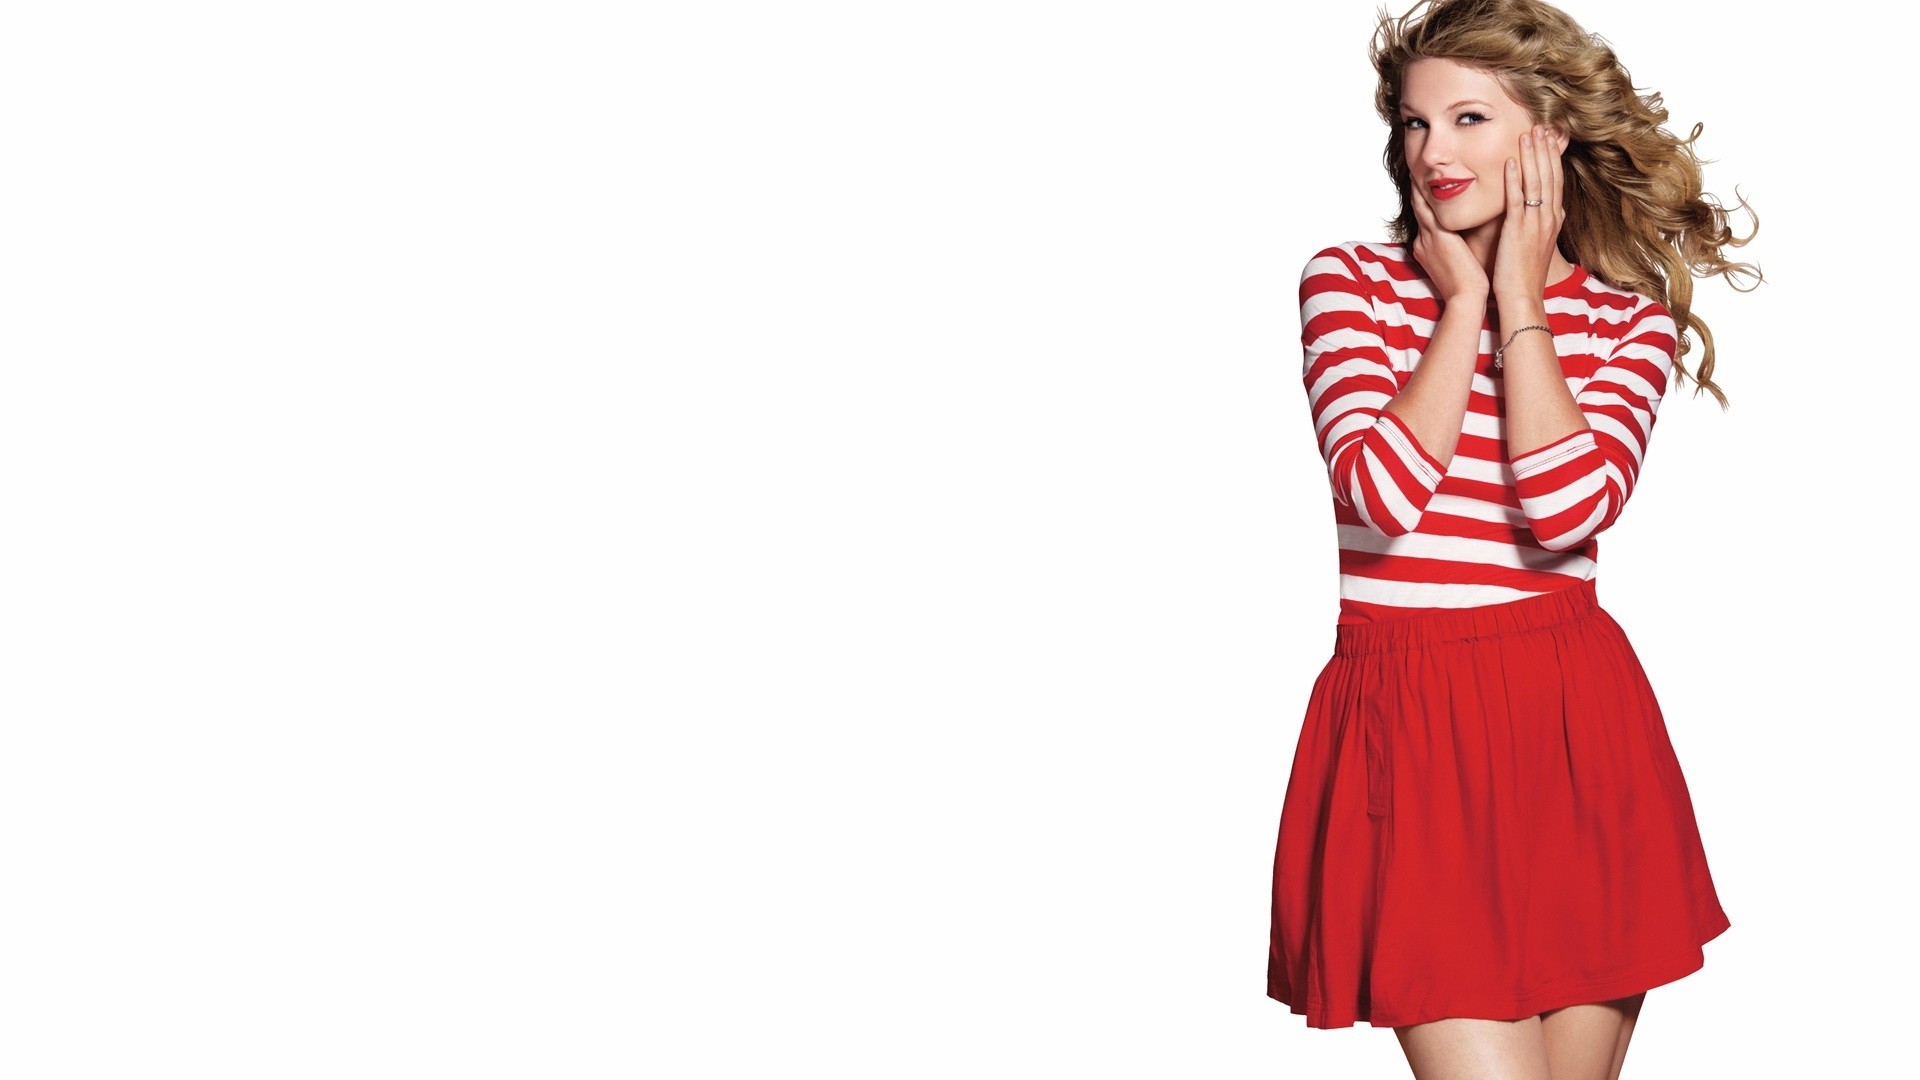 People 1920x1080 Taylor Swift celebrity blonde singer women simple background white background striped clothing standing studio women indoors indoors